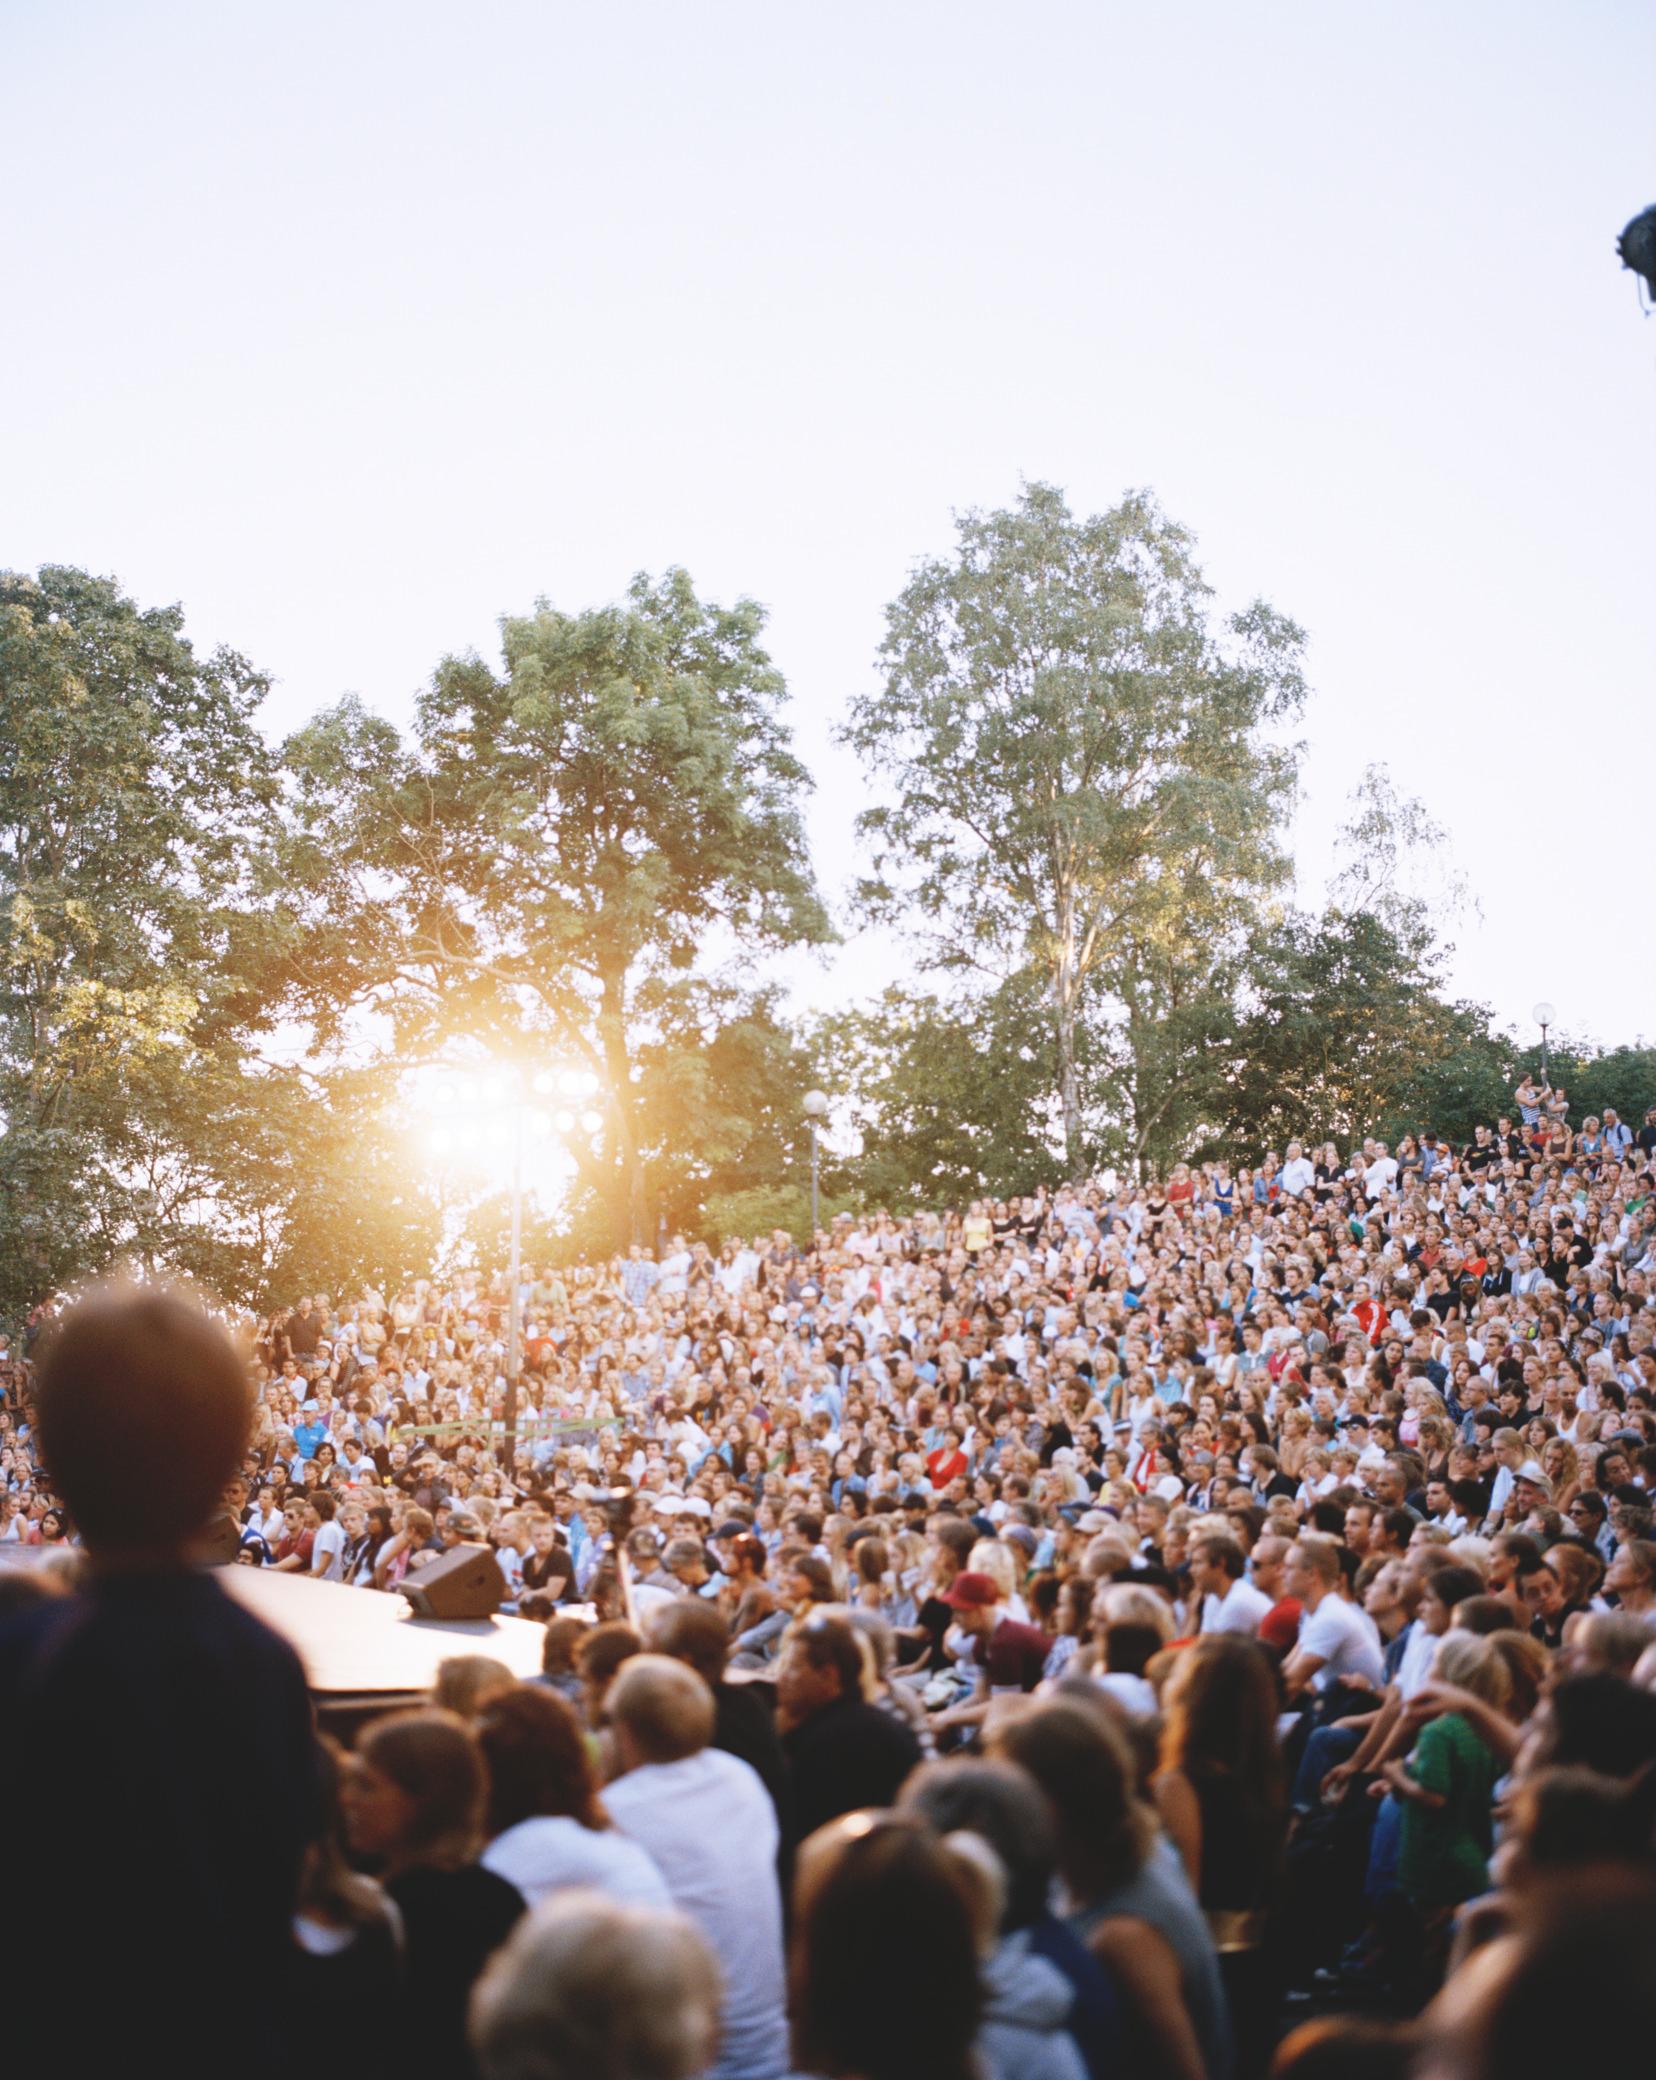 During the entire summer, "Parkteatern" arranges musical events as well as theatre and dance performances all around the city parks, with no admission. Opera, jazz, pop, folk music and theatre is available free of charge, from June to September.